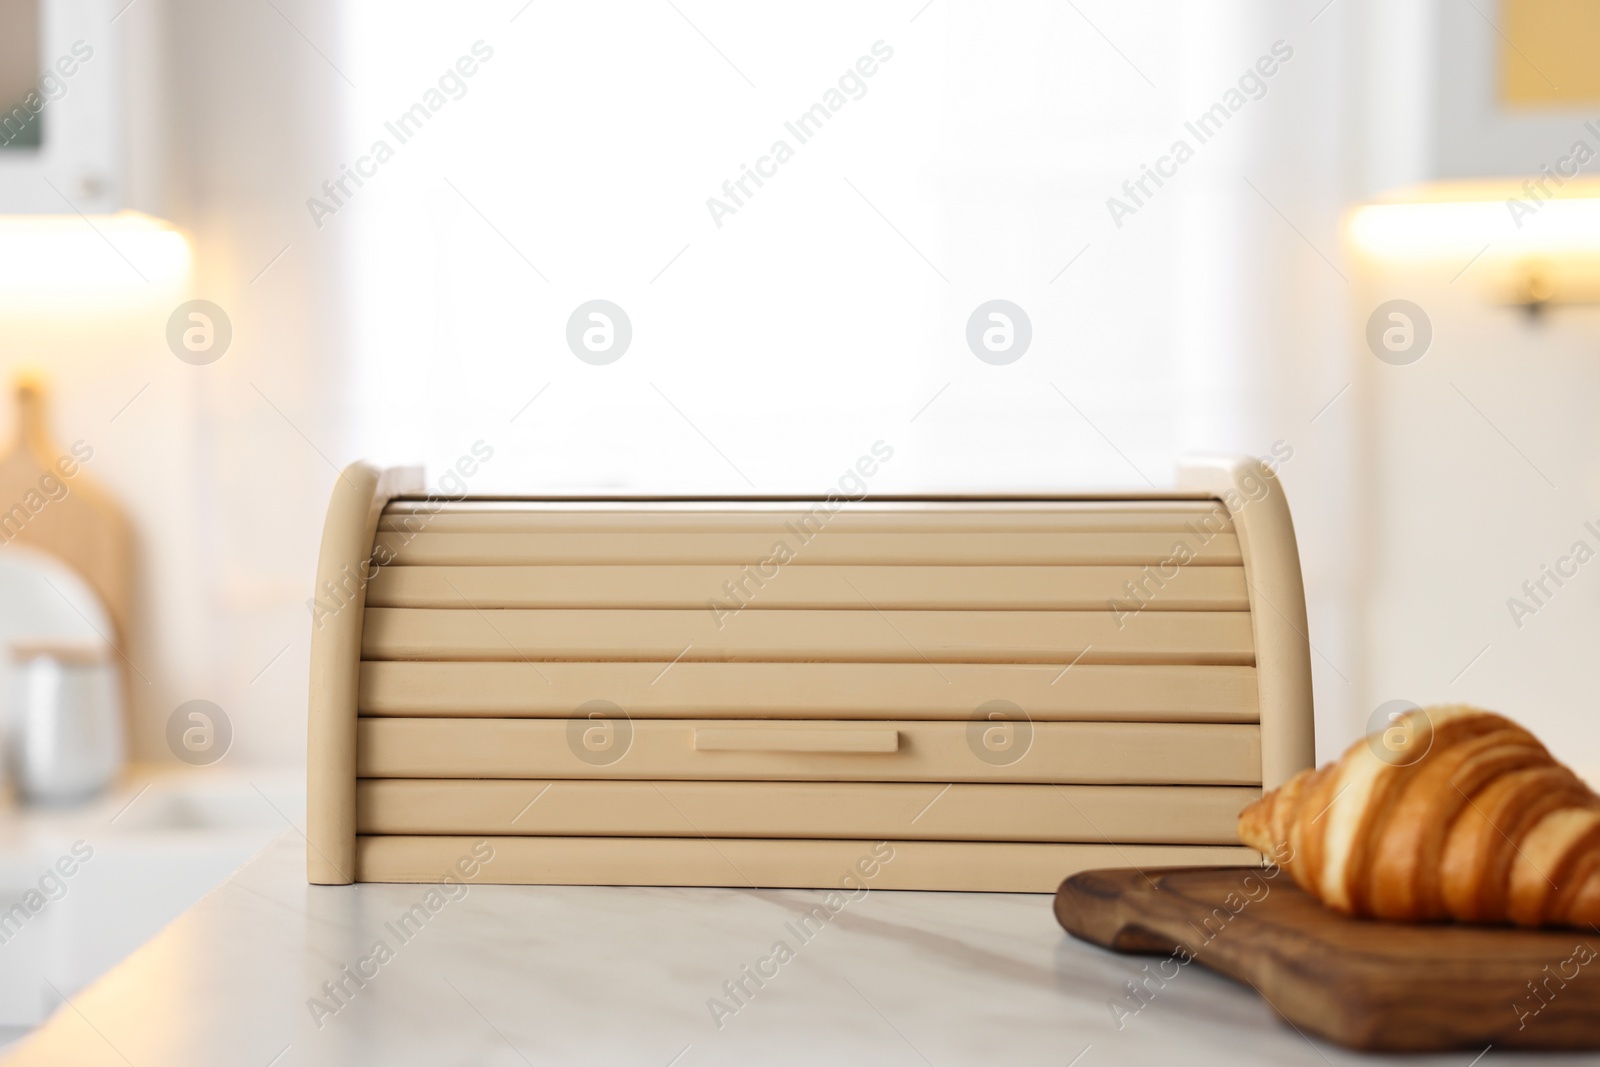 Photo of Wooden bread box and board with croissant on white marble table in kitchen